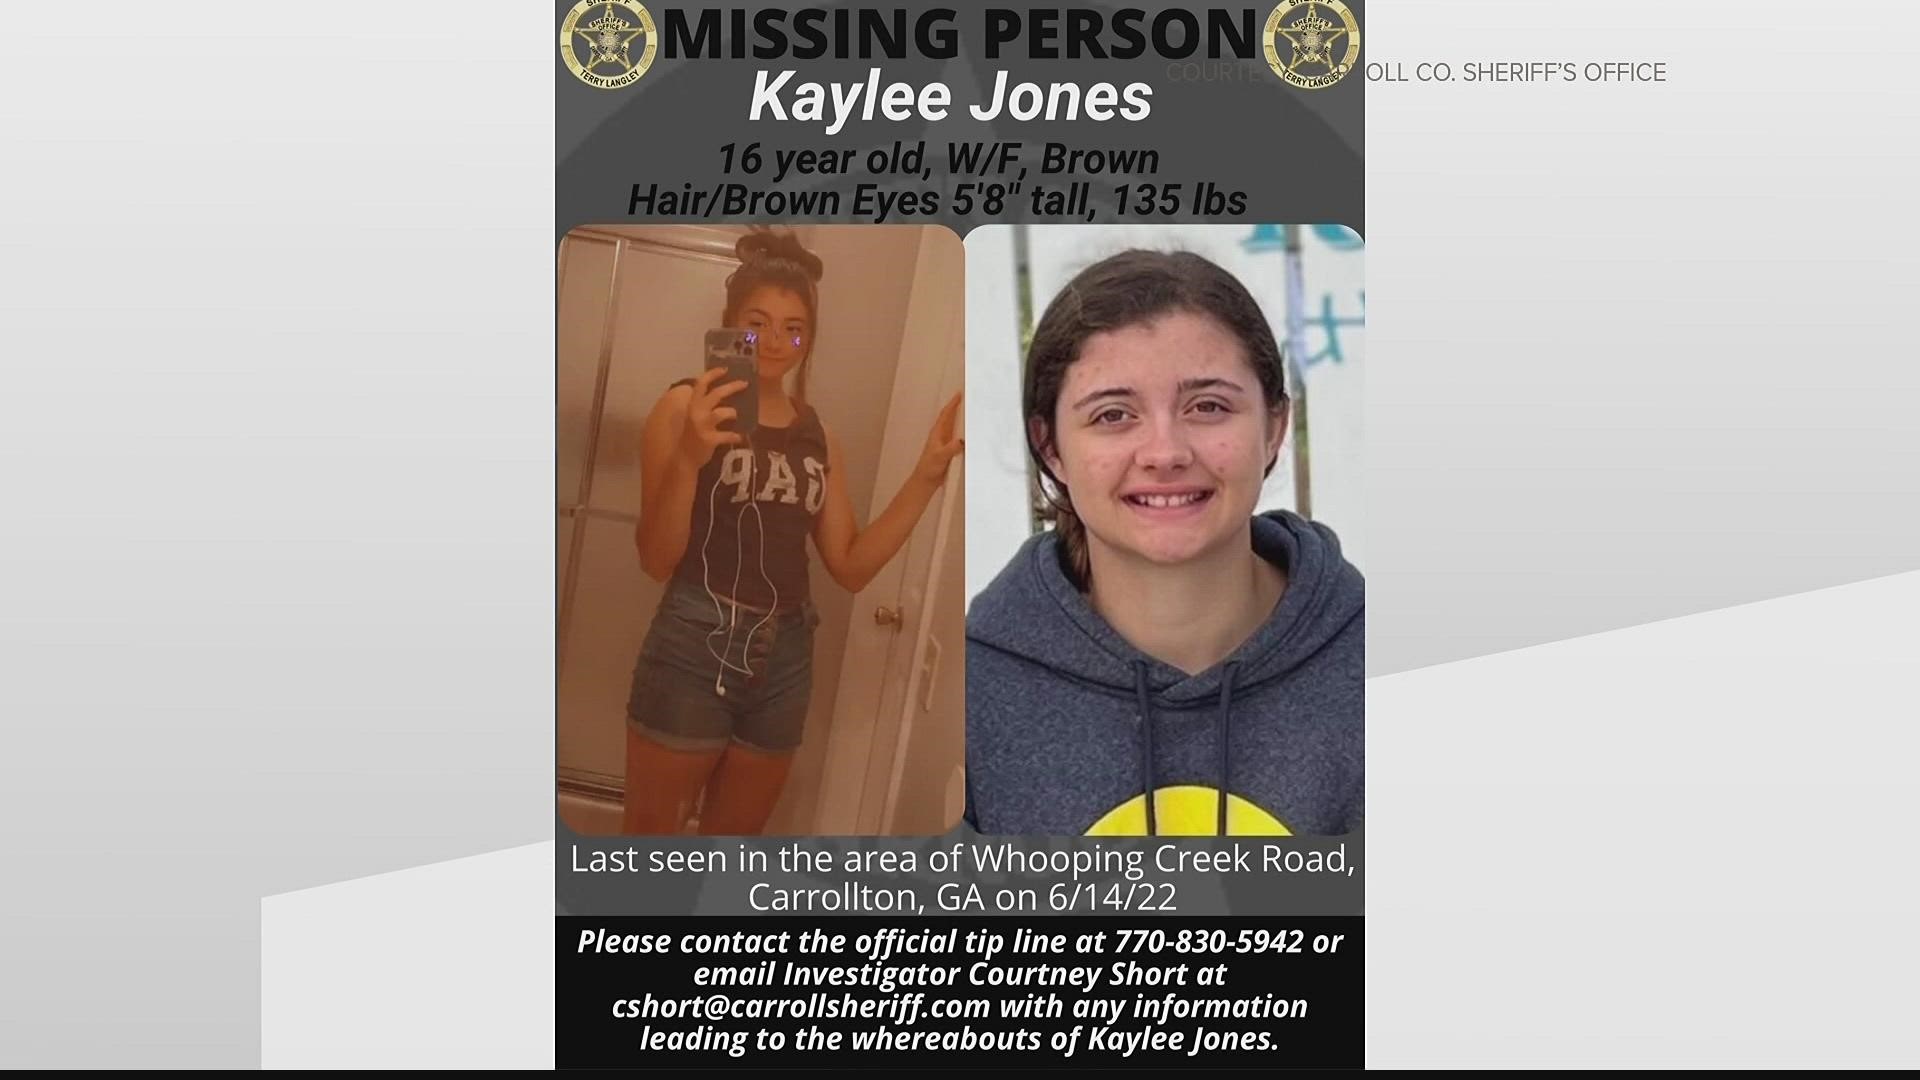 Kaylee Jones was reported missing the morning of June 15.